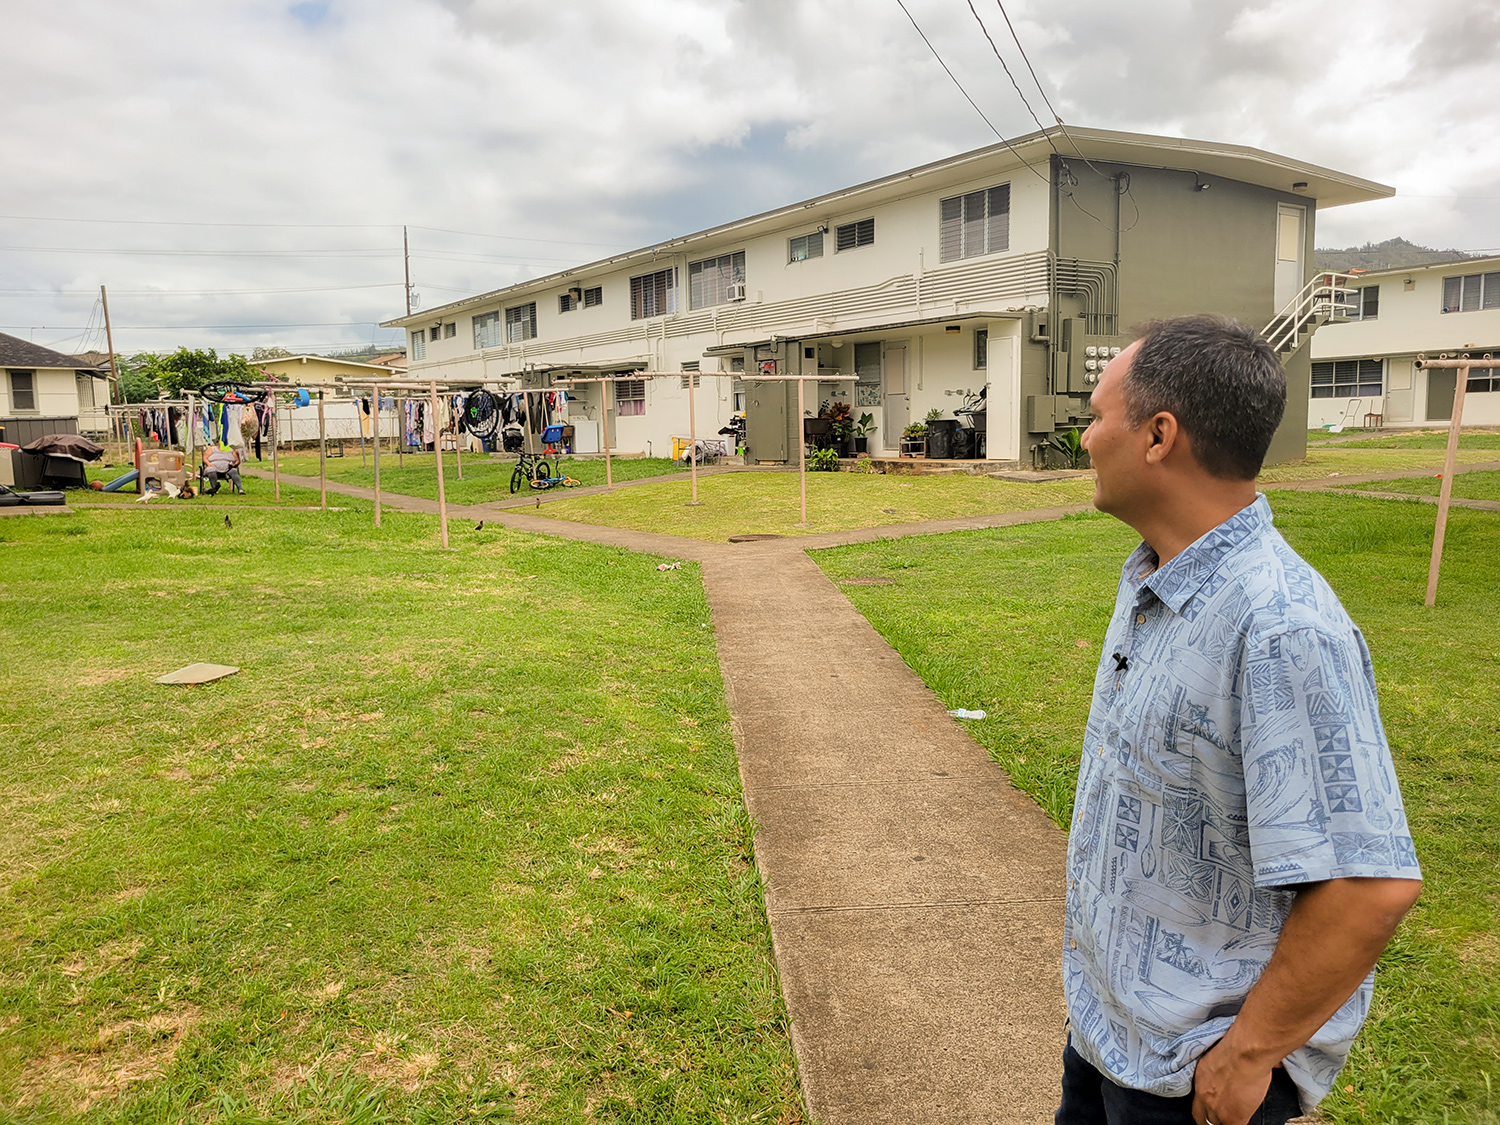 A man in a blue shirt stands looking away from the camera at a two-story multi-family housing unit. 